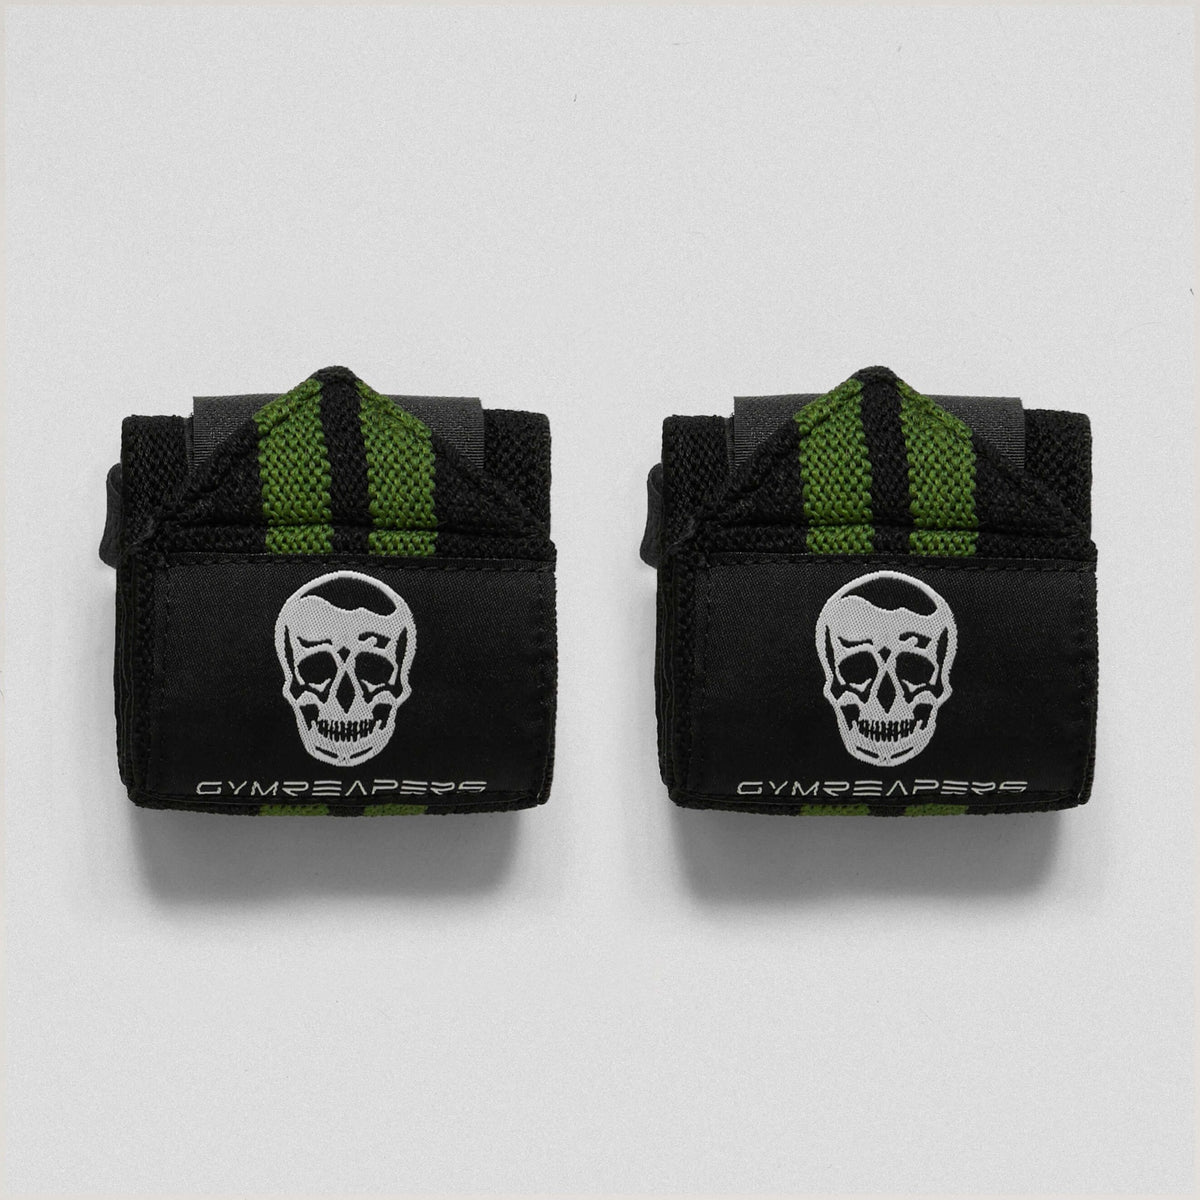 Gymreapers Wrist Wraps - 18 Weightlifting Wrist Support - Green